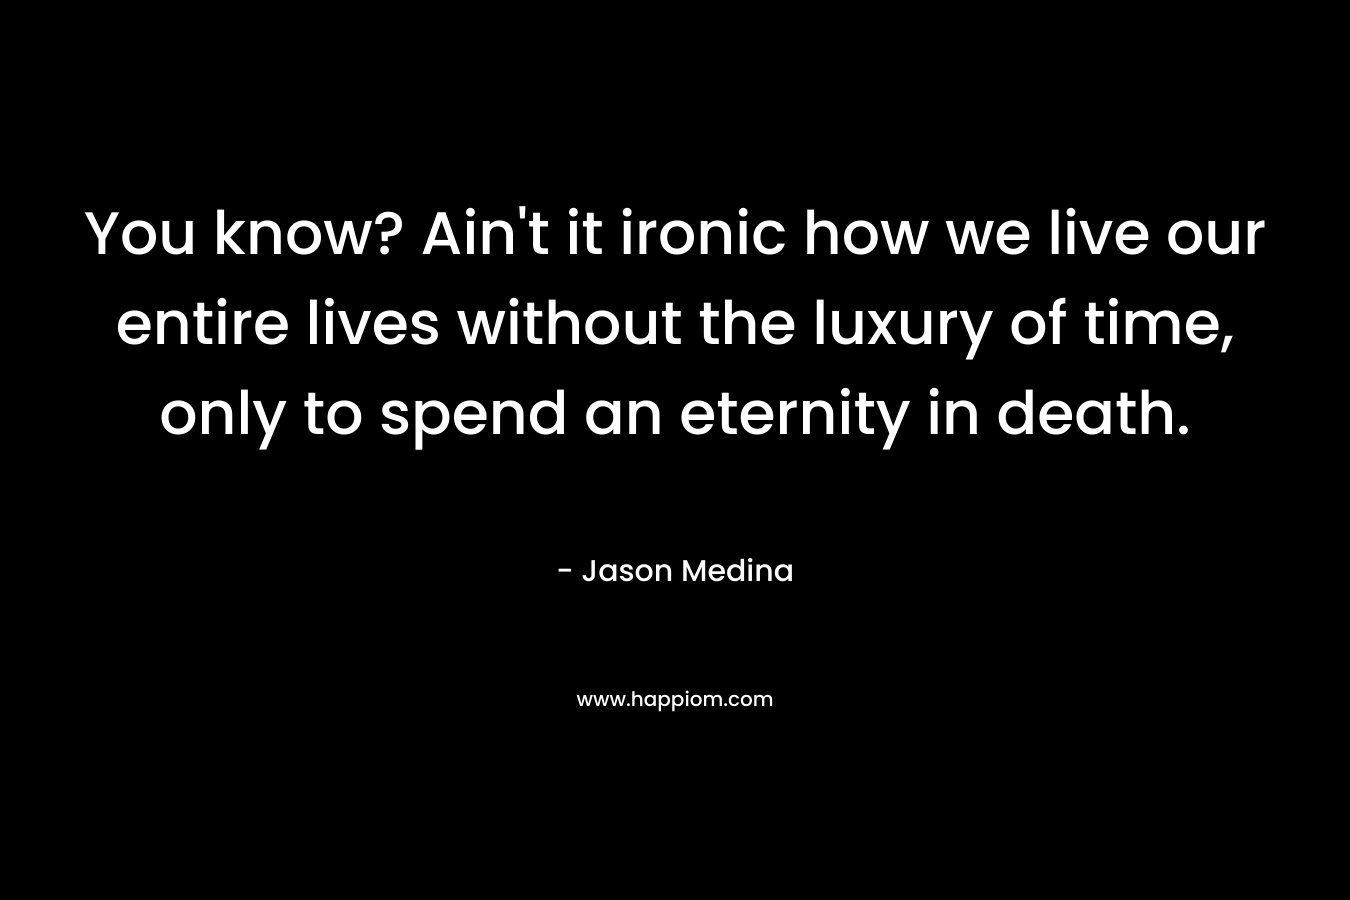 You know? Ain’t it ironic how we live our entire lives without the luxury of time, only to spend an eternity in death. – Jason Medina